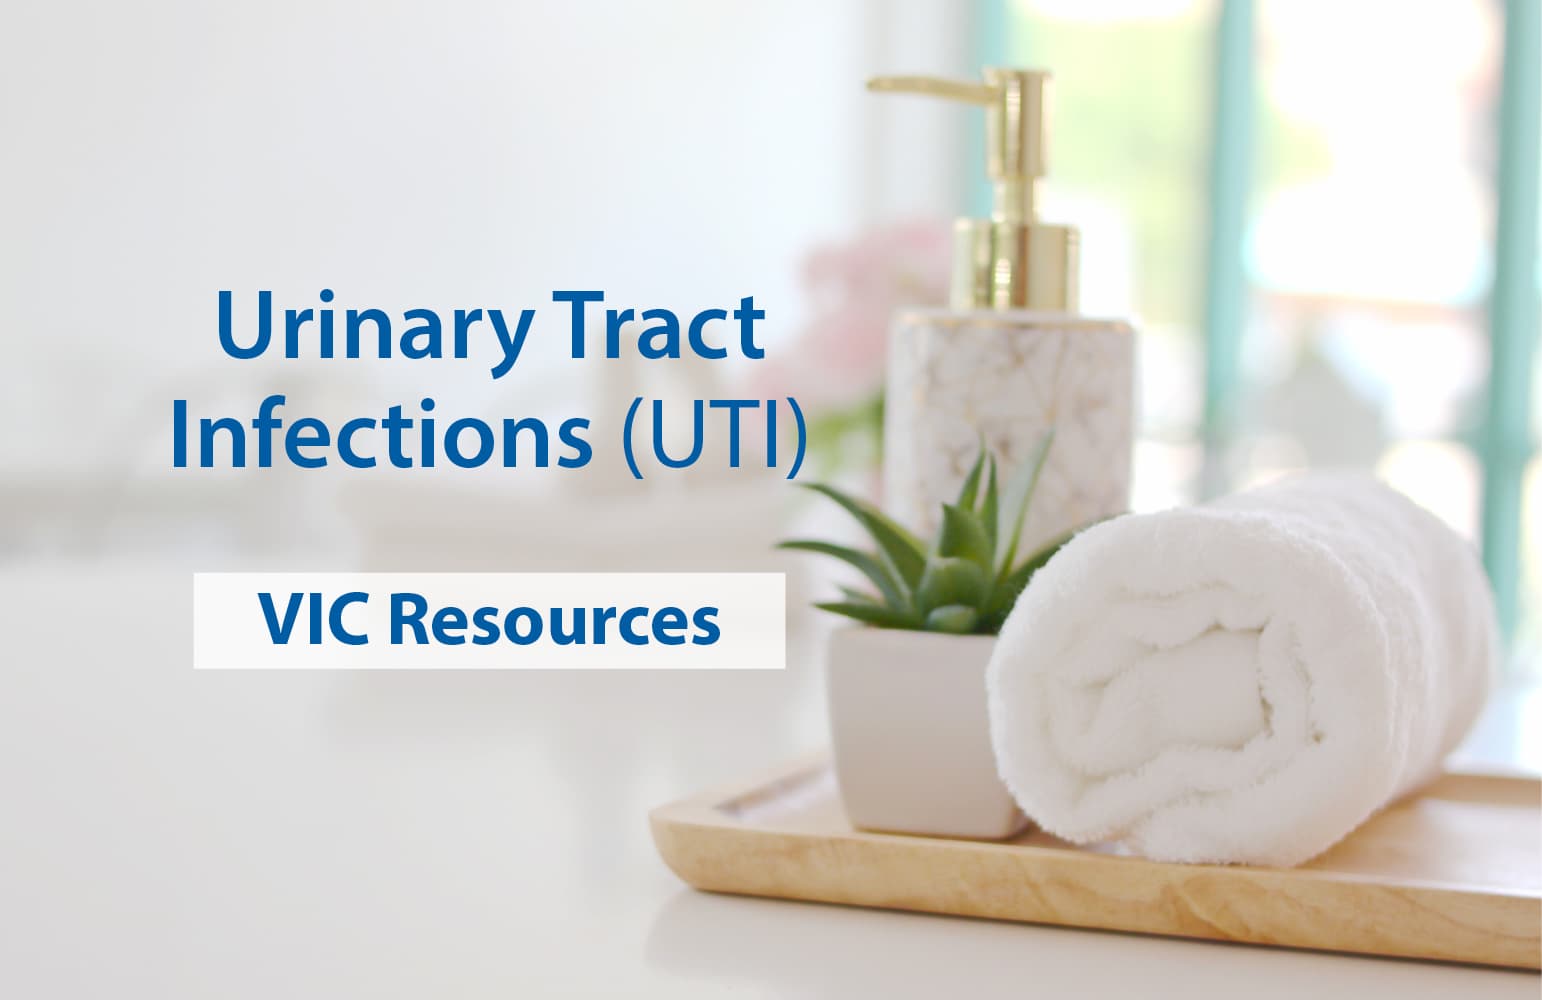 Image tile of Vic Resources for UTI